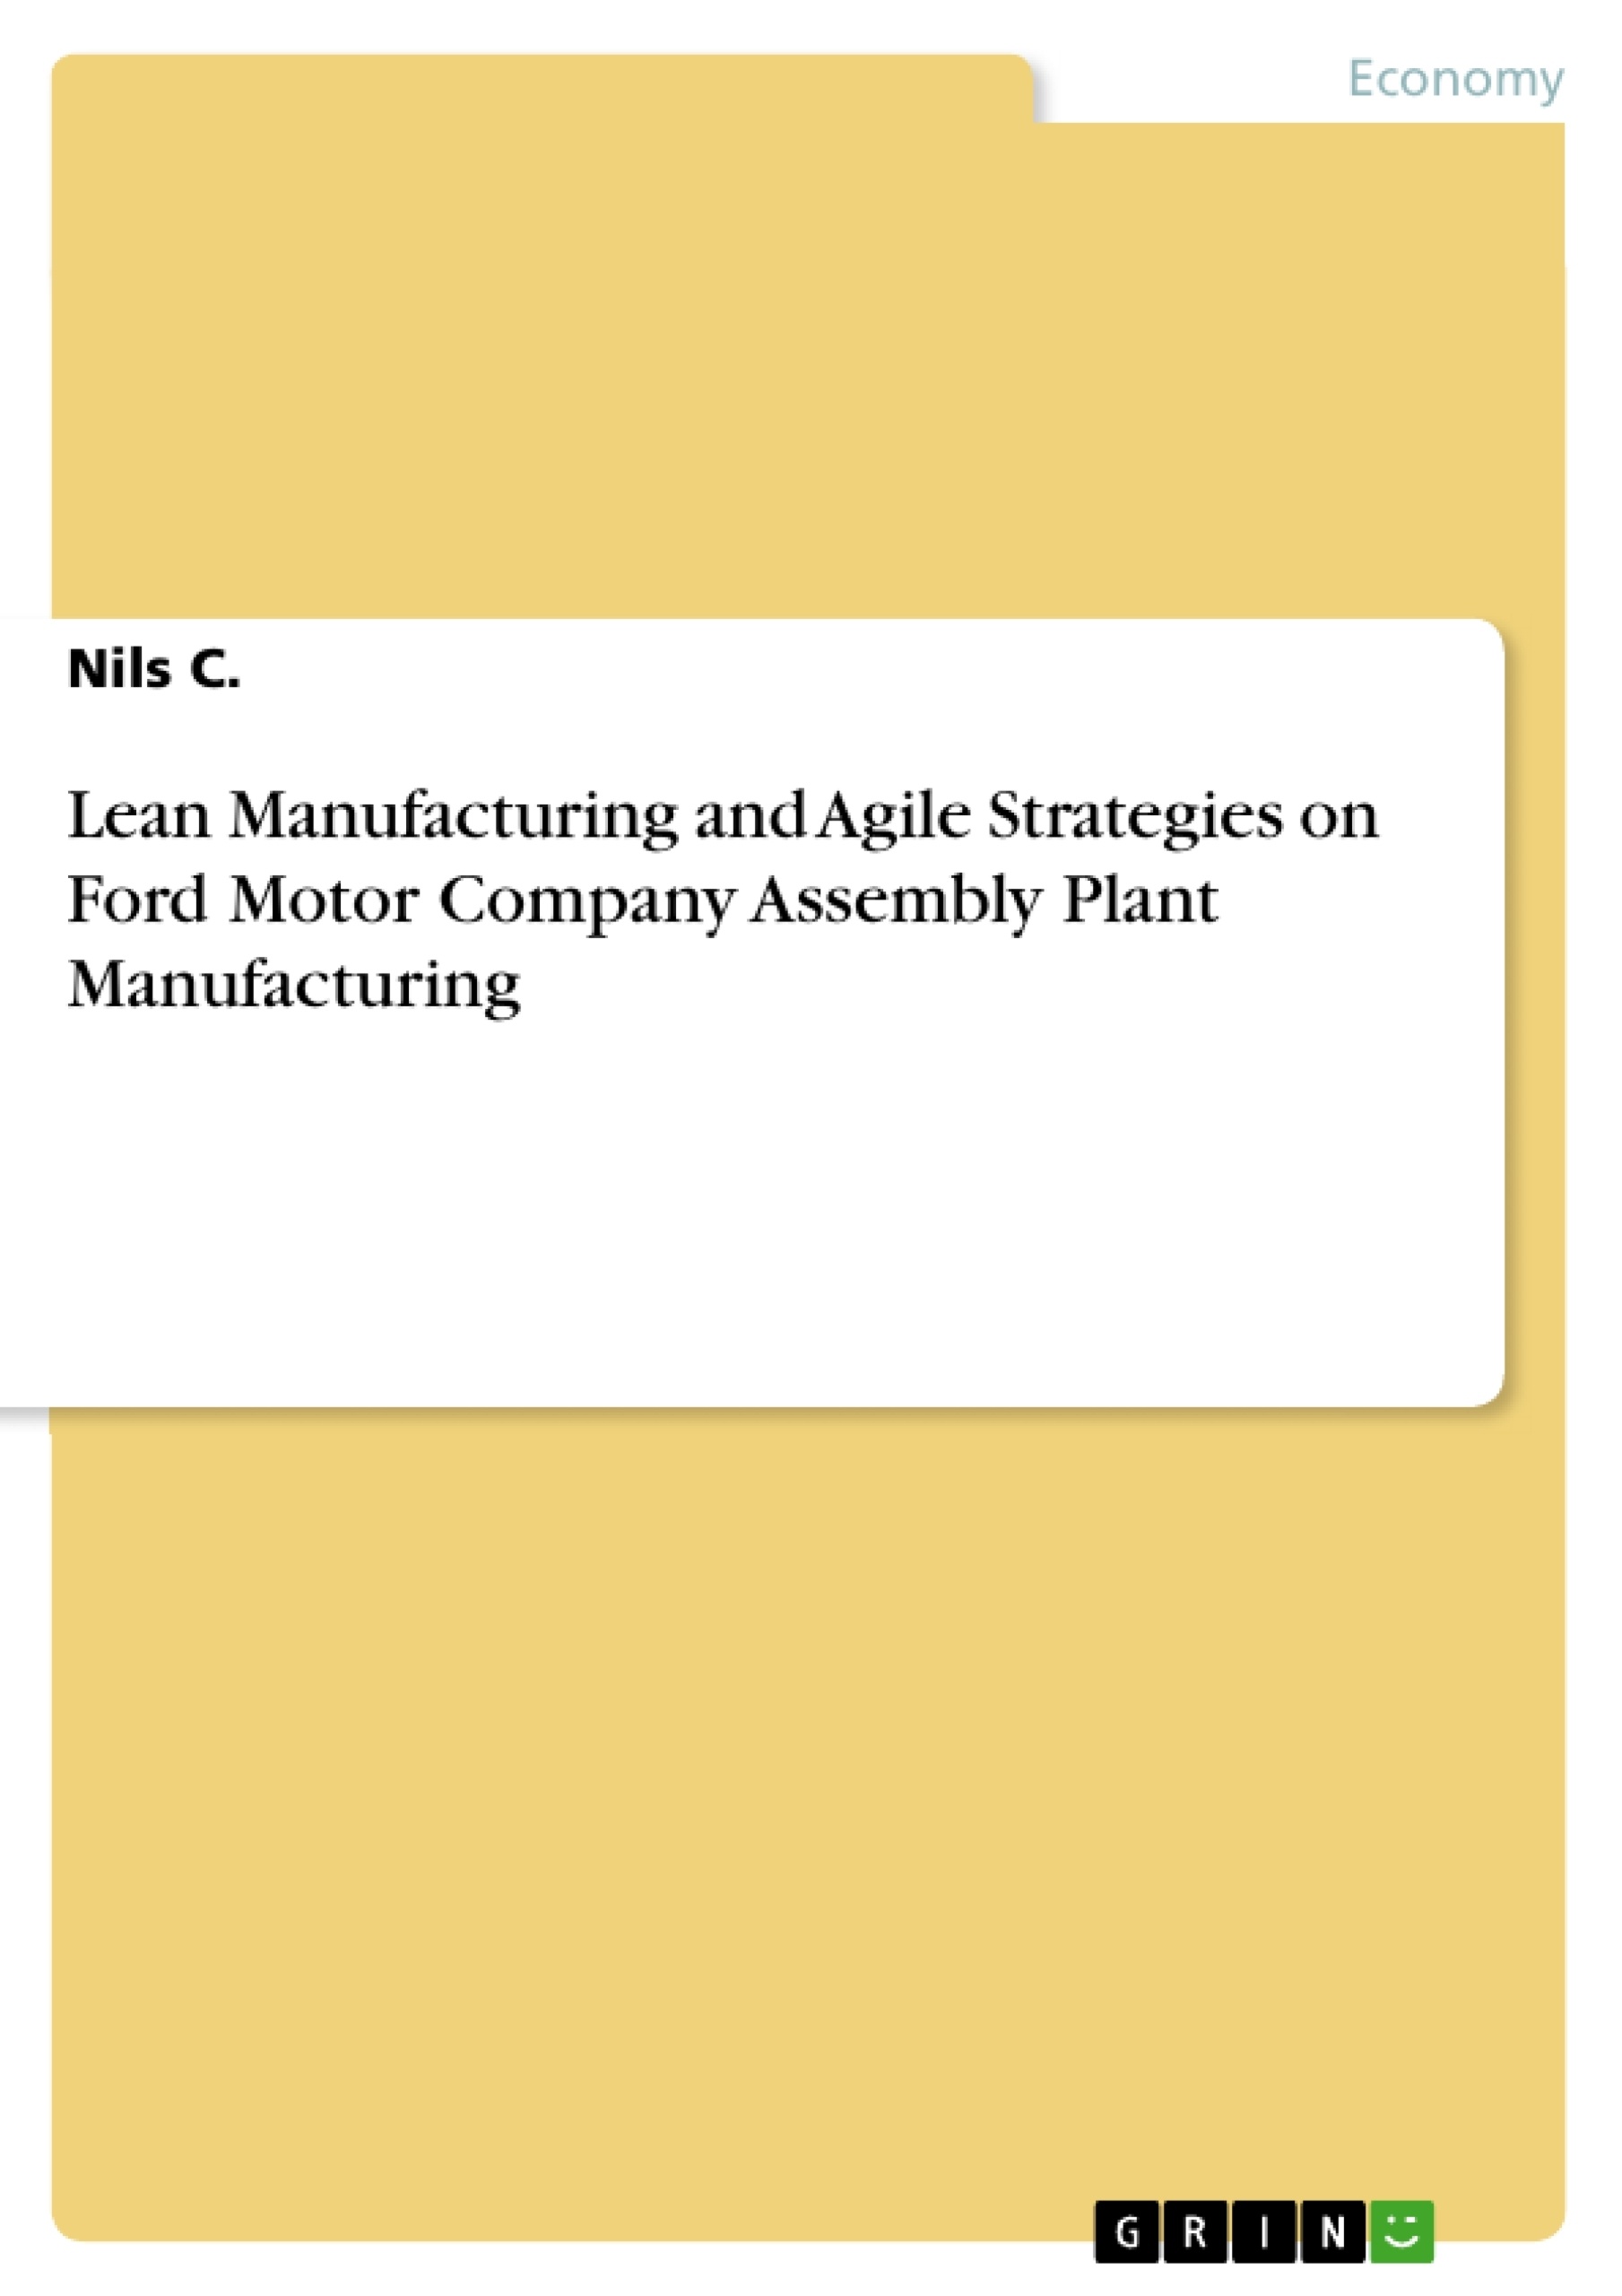 ford lean manufacturing case study